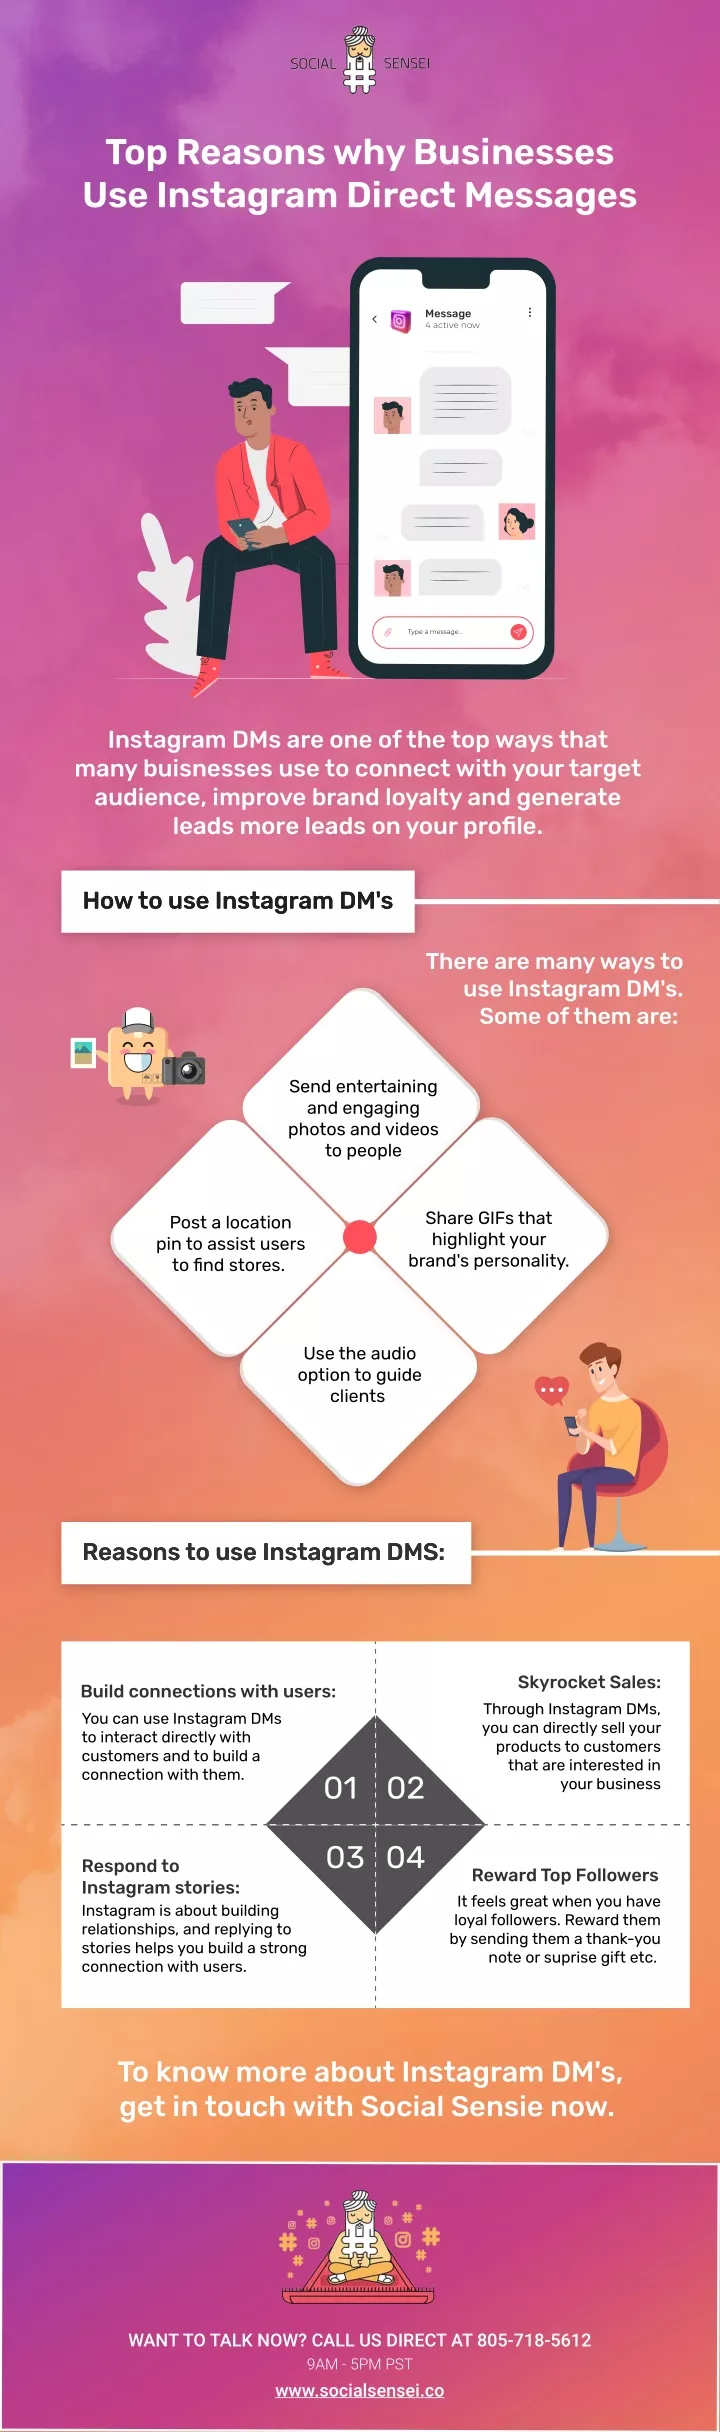 top reasons why businesses use instagram direct